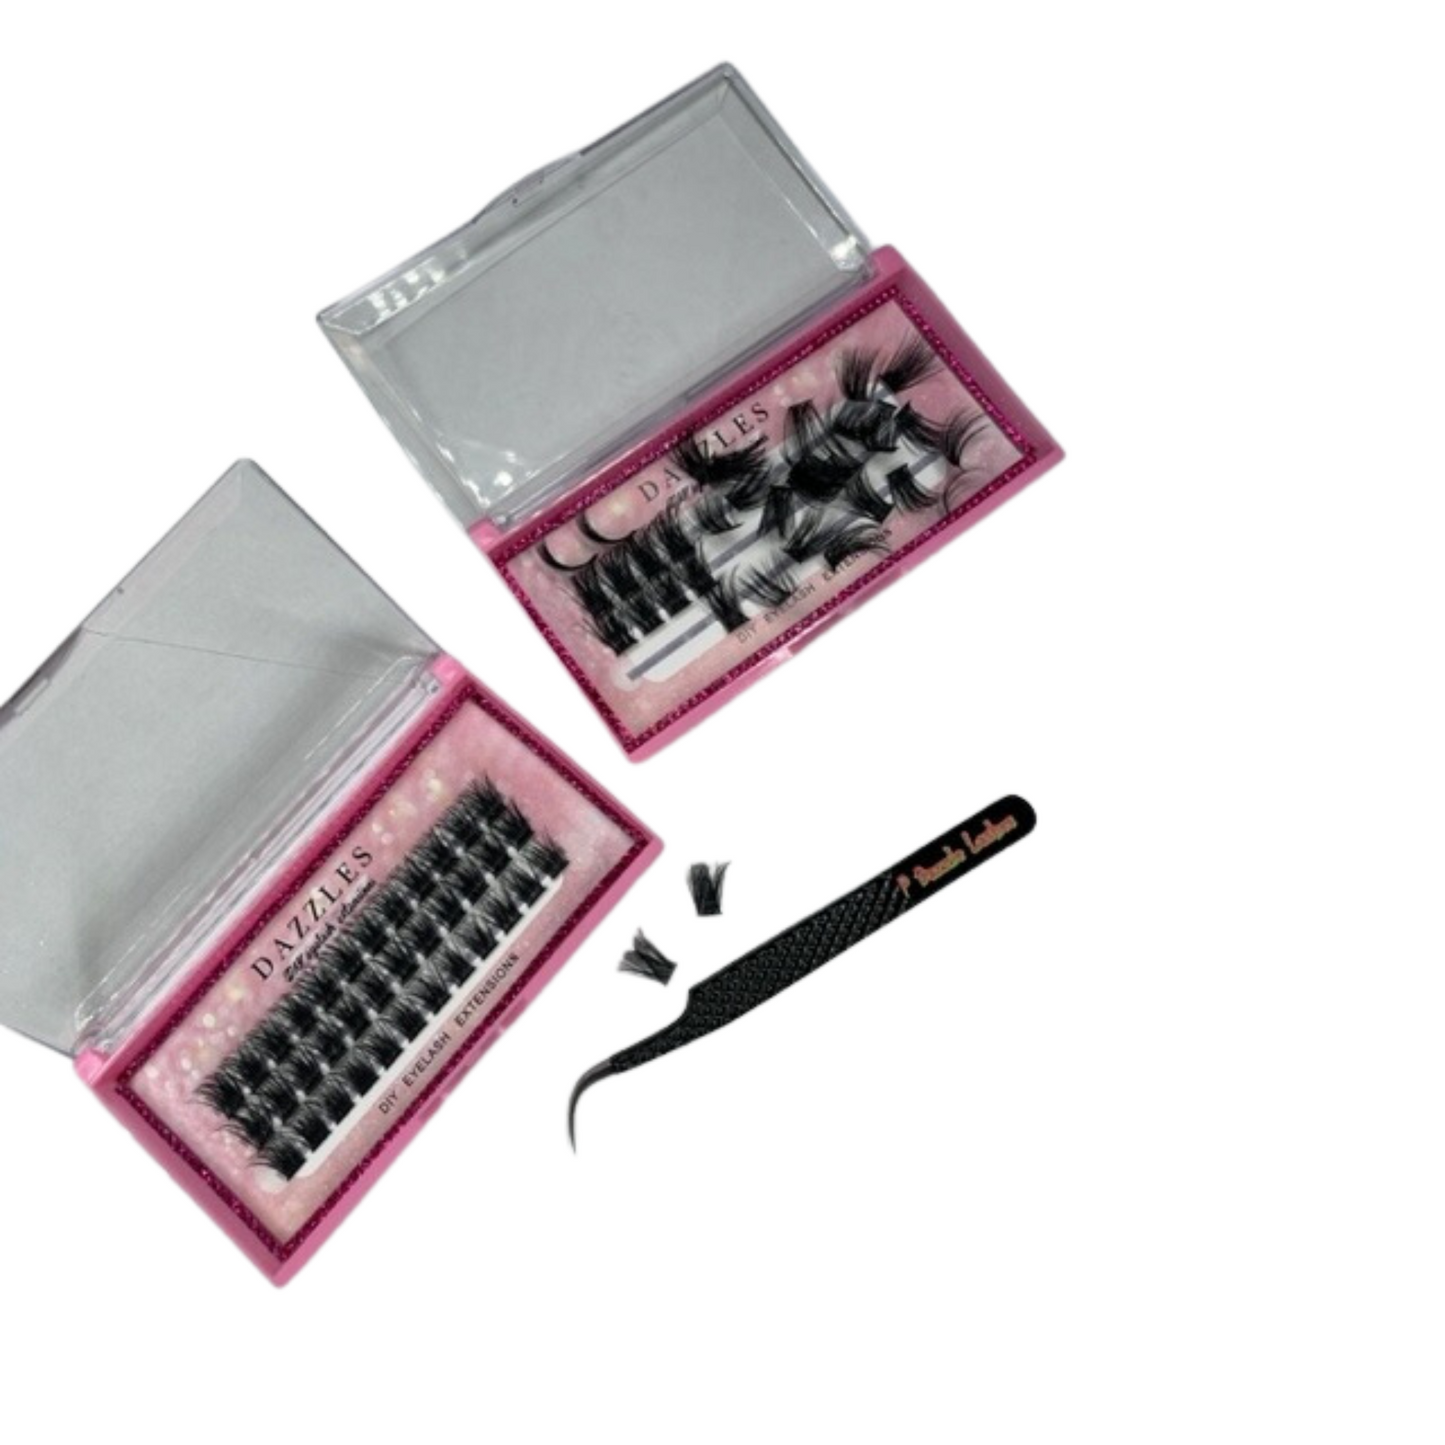 Dazzles Do It Yourself (DIY) Cluster Lash Extension Kit